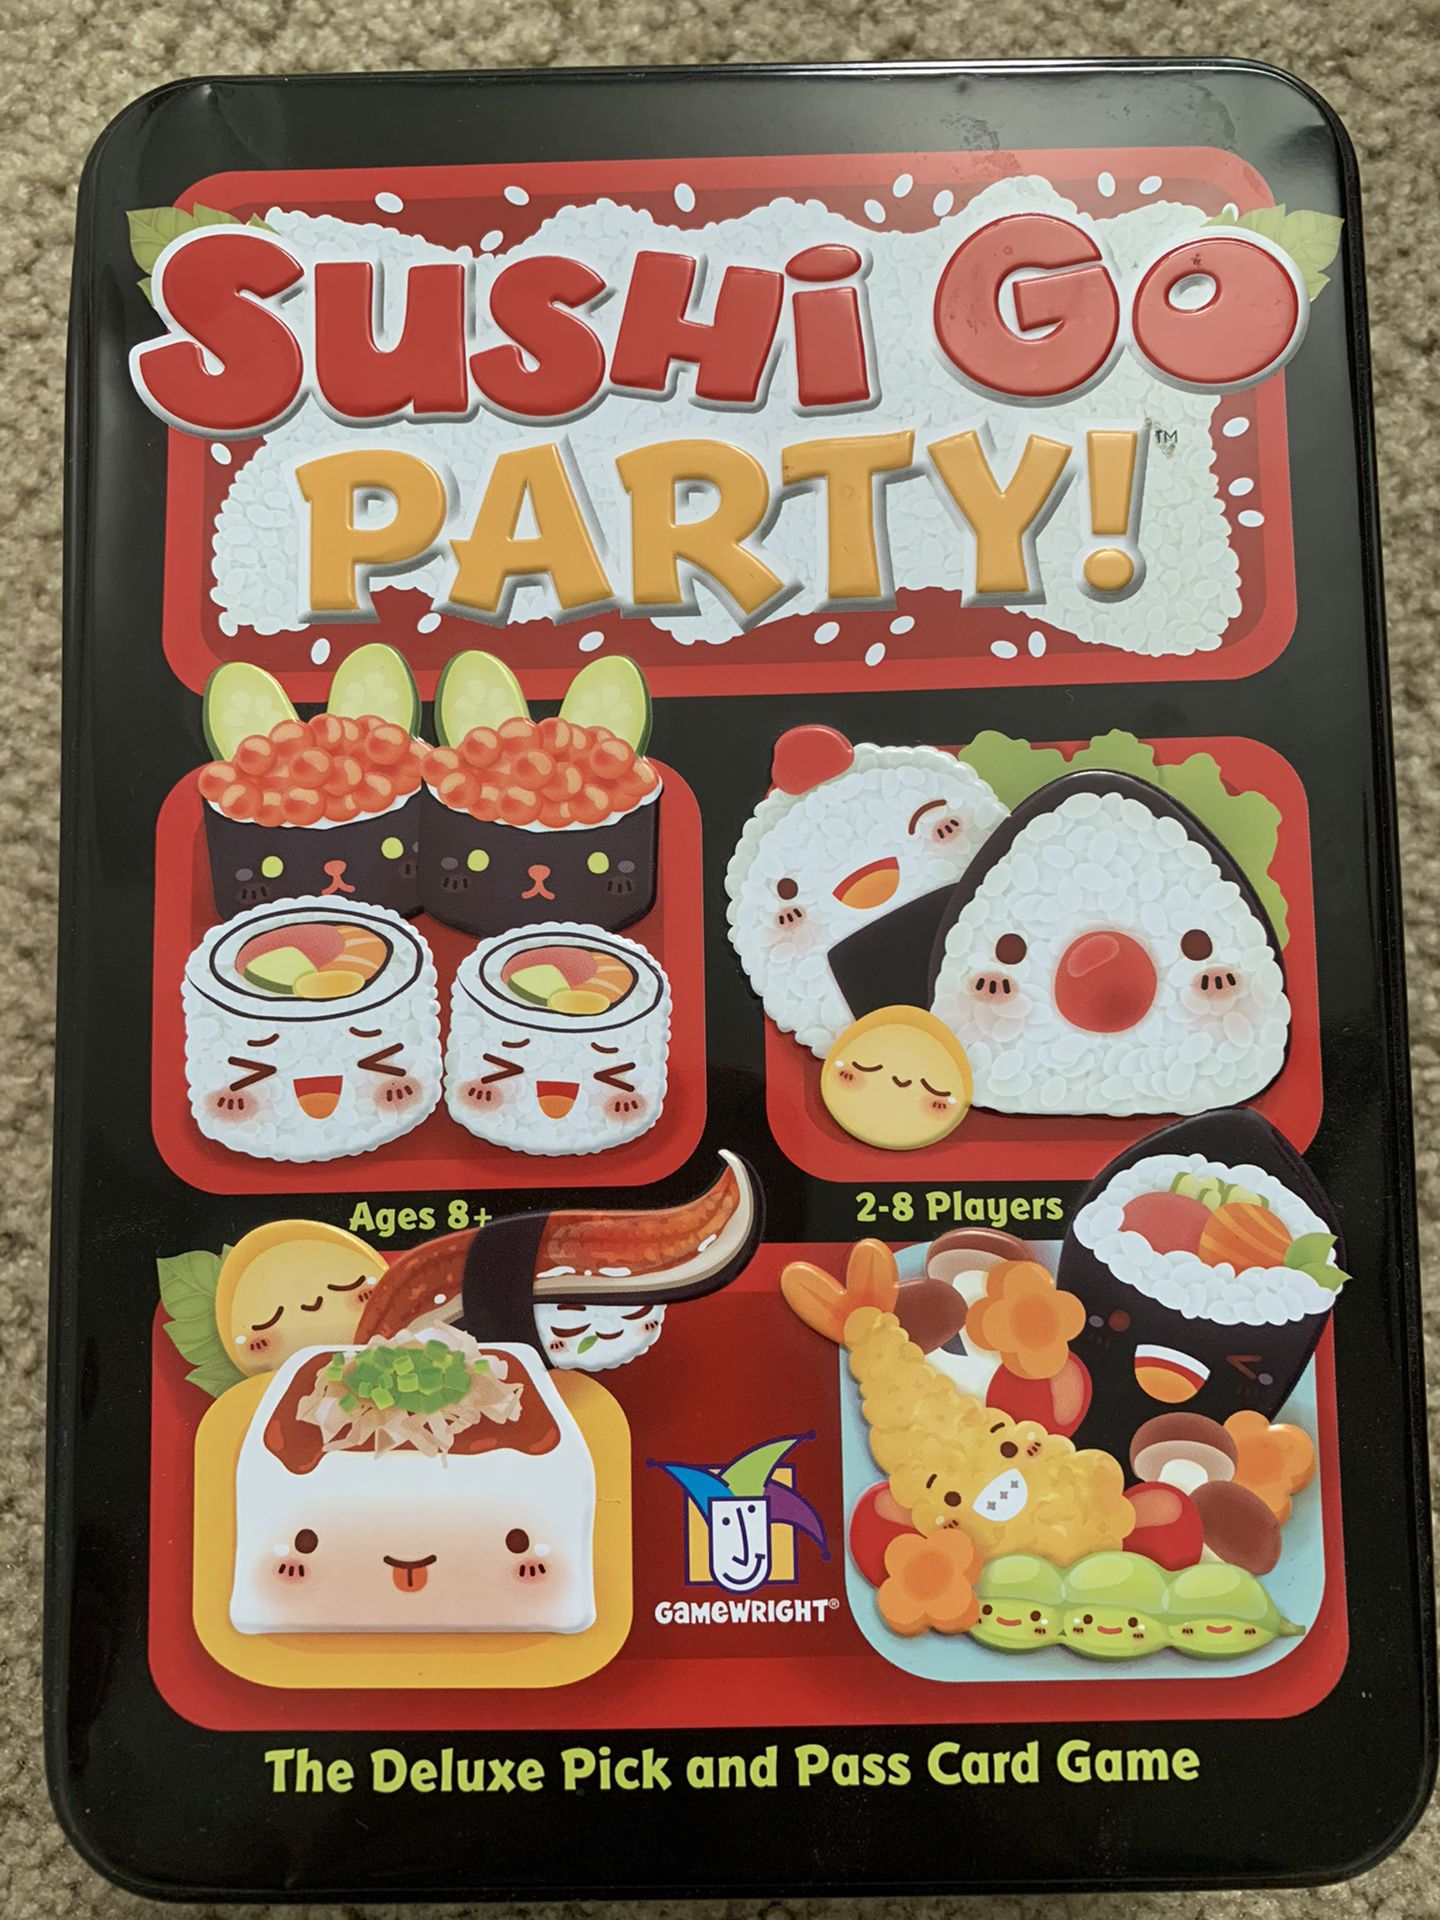 Sushi Go Party! Deluxe Version Board Game